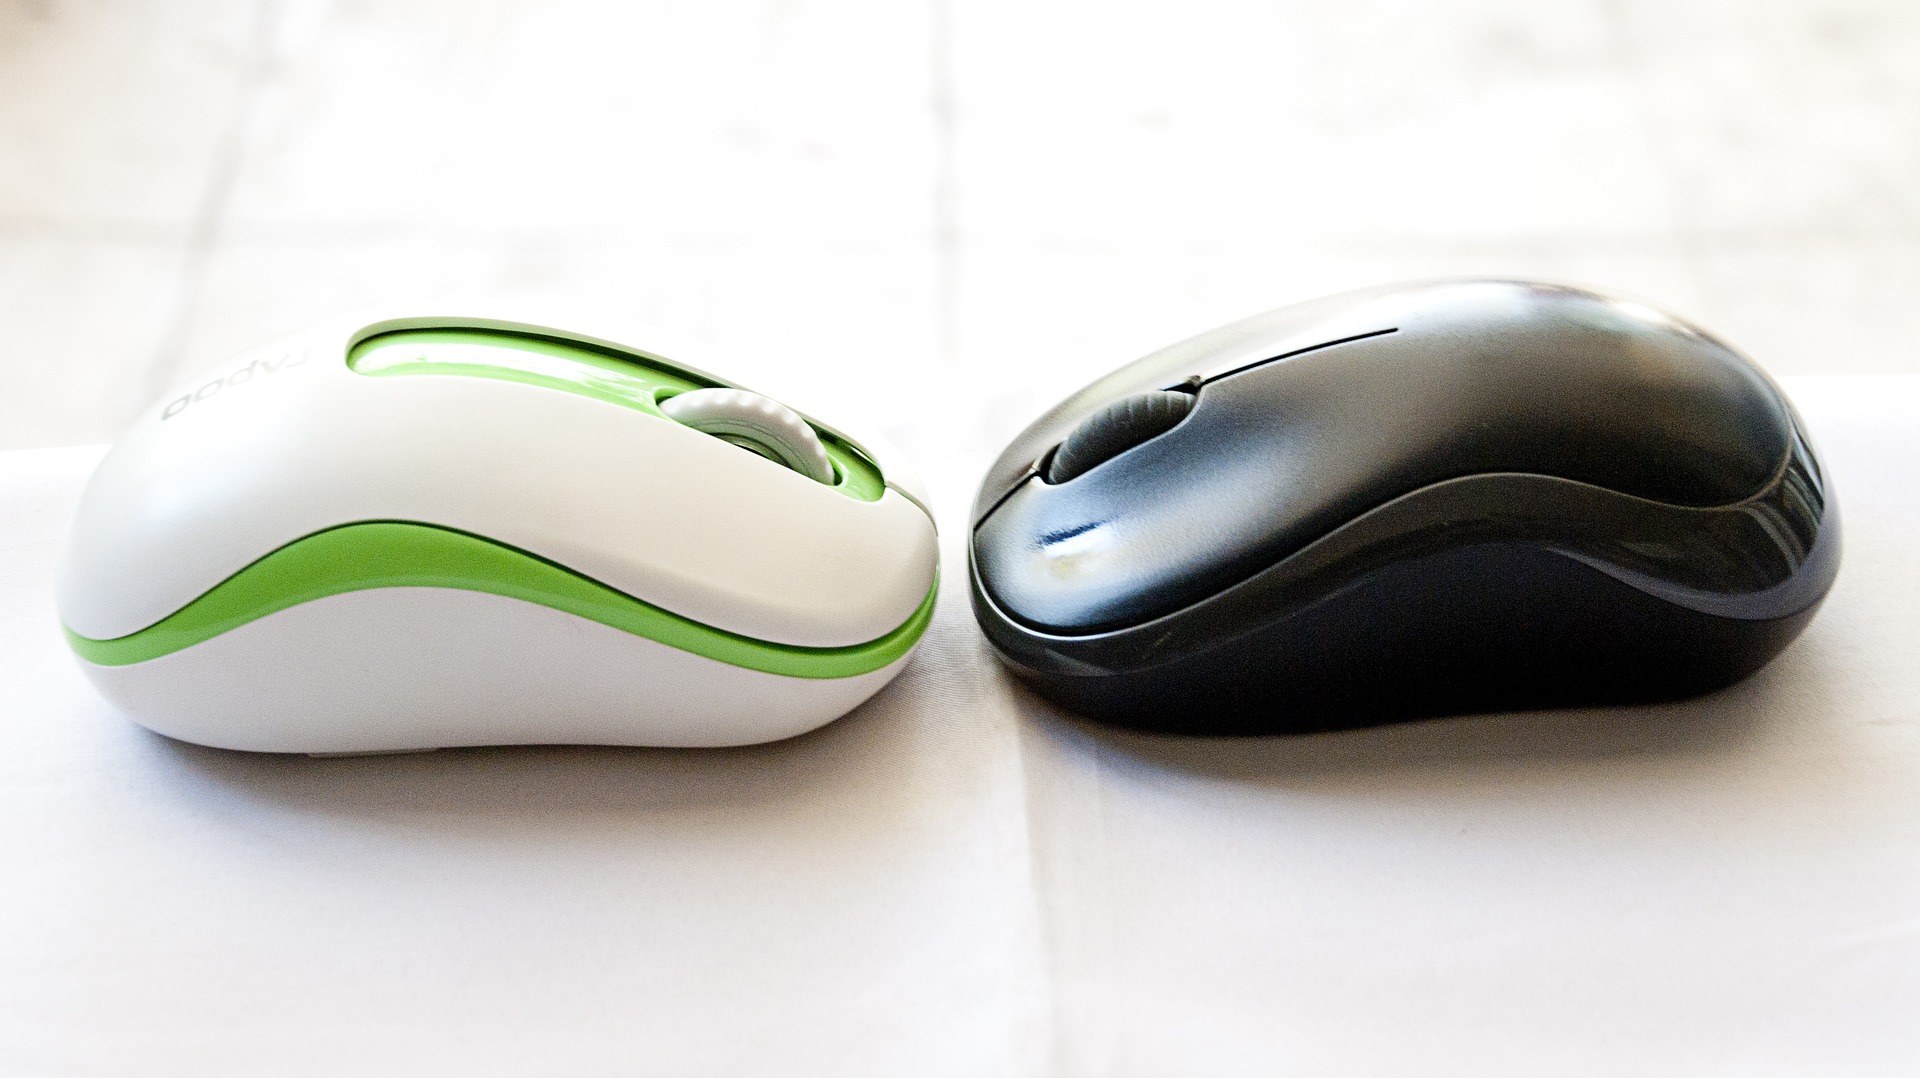 microsoft wireless mouse for mac